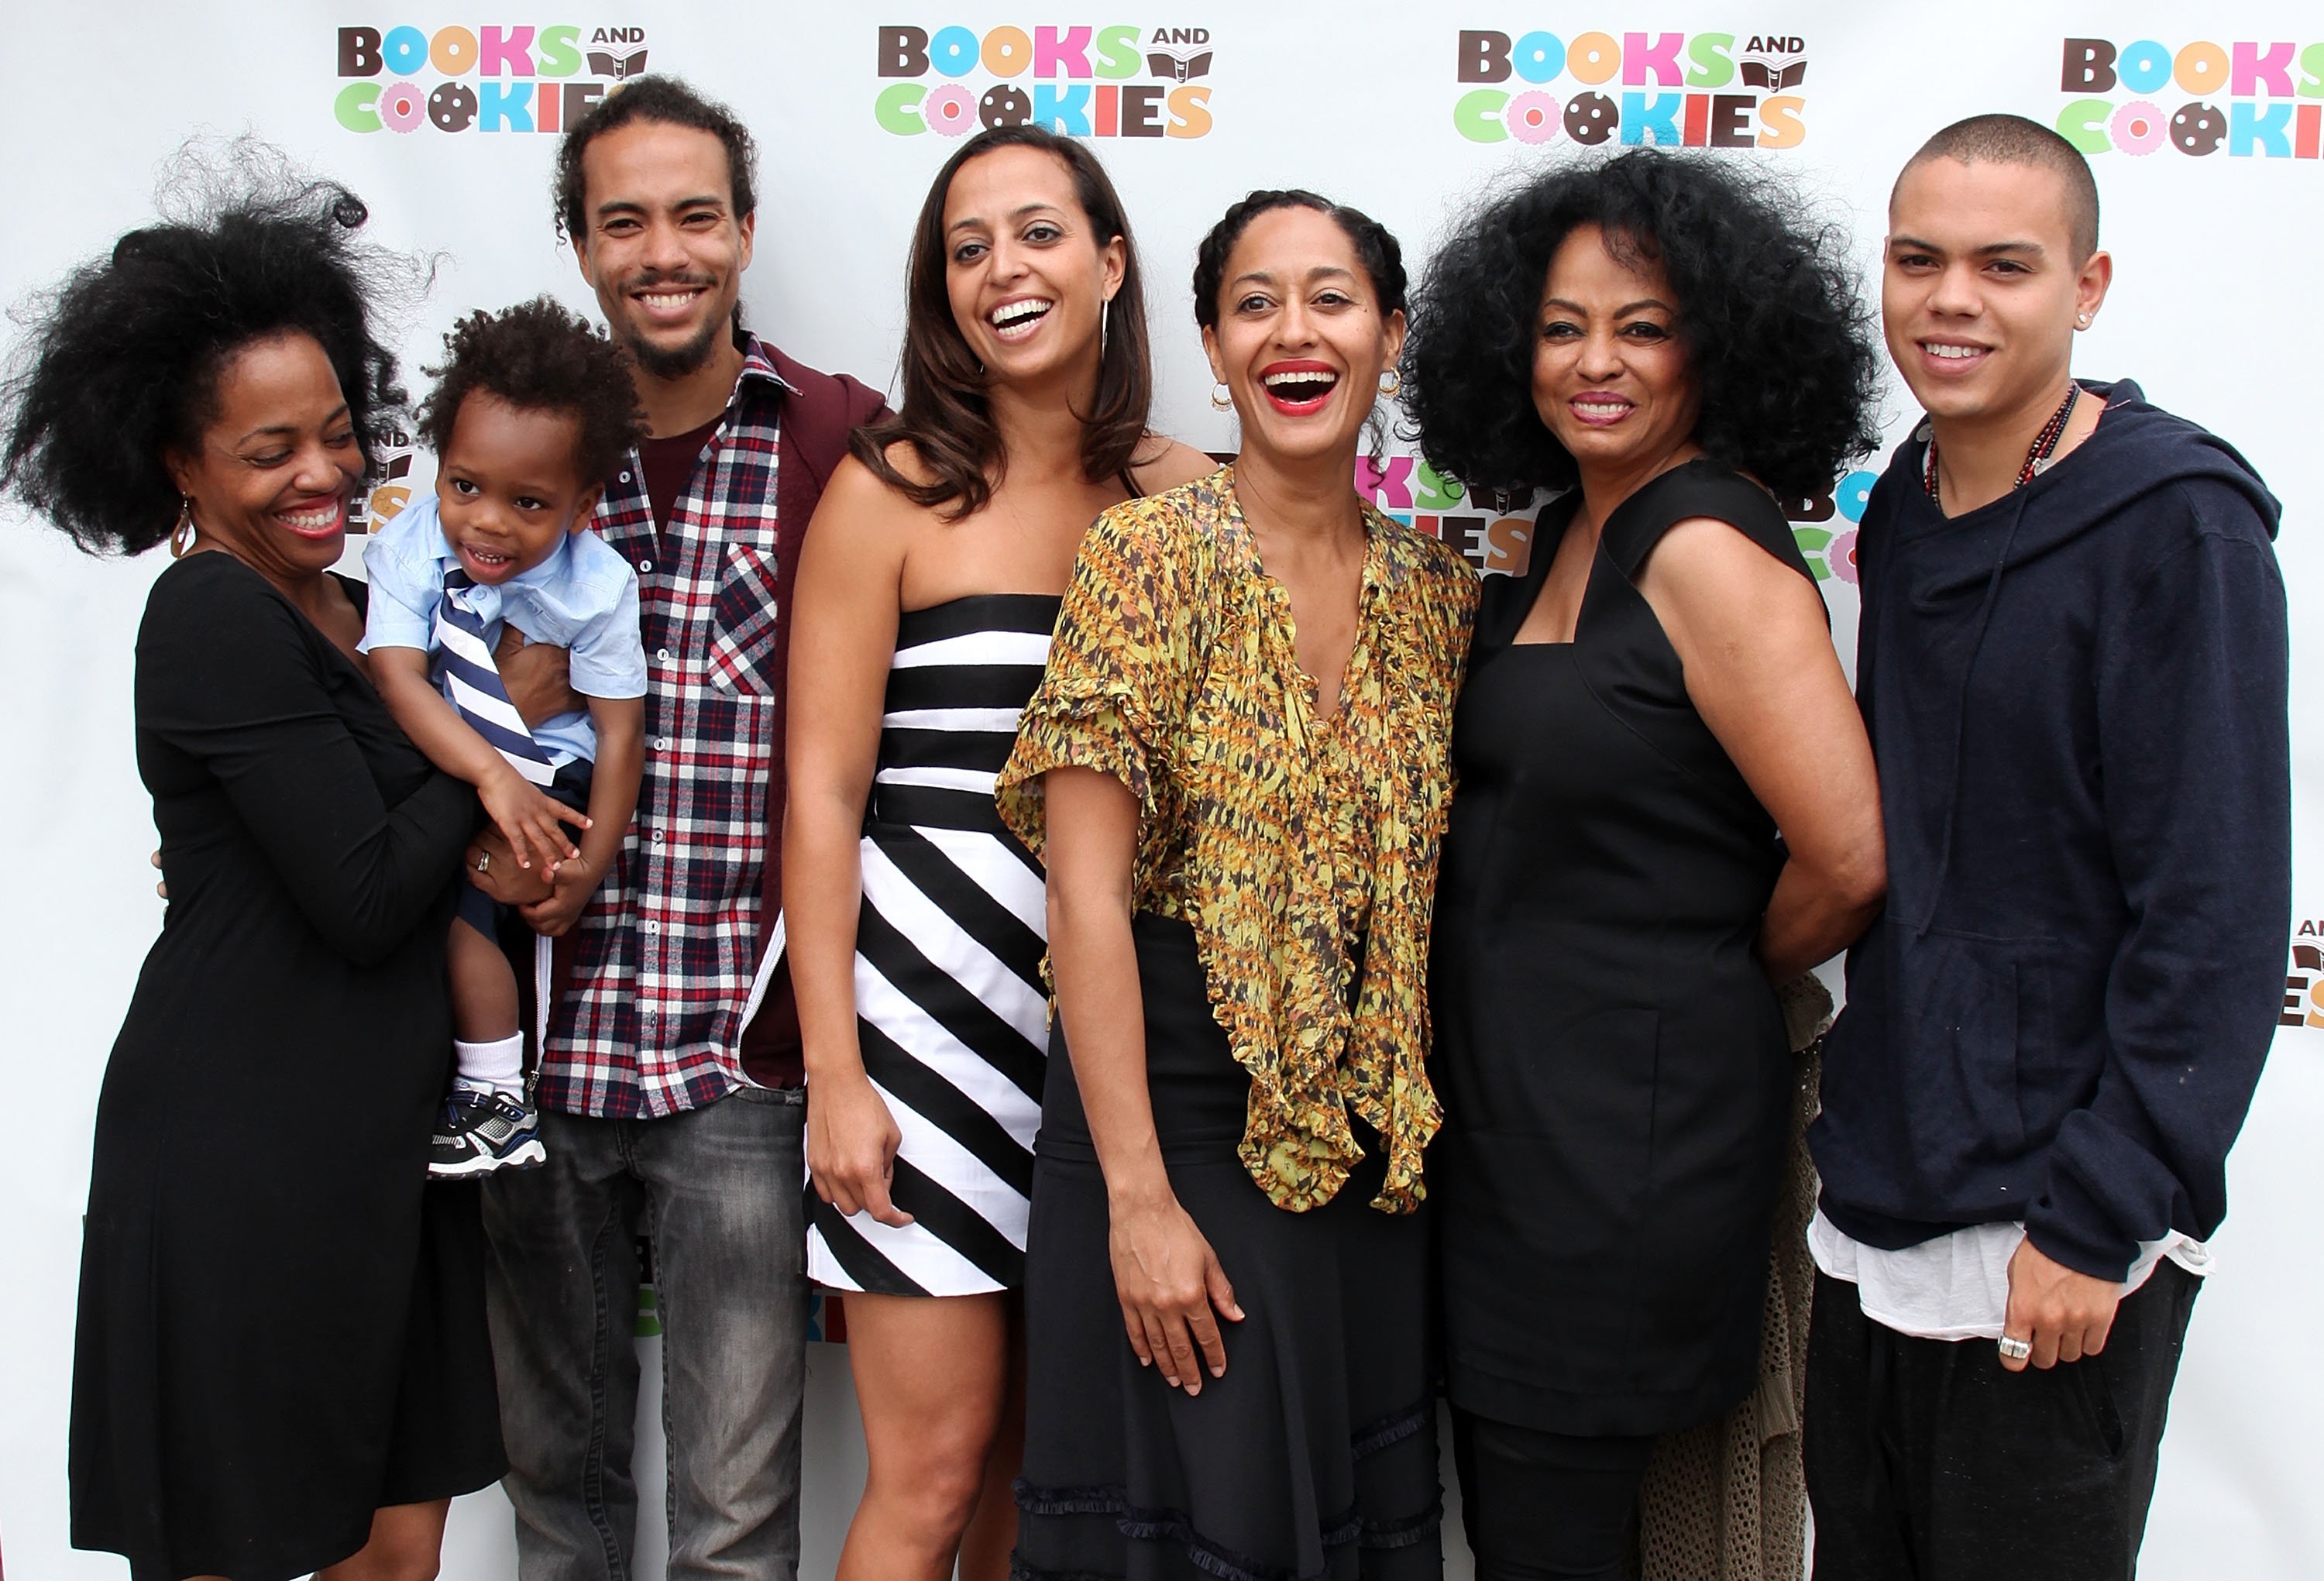 Pictured: (From L-R) Rhonda Ross Kendrick, Raif Kendrick, Ross Naess, Chudney Ross, Tracee Ellis Ross, Diana Ross and Evan Ross attend Books & Cookies grand opening at Books and Cookies on May 14, 2011 in Santa Monica, California | Photo: Getty Images